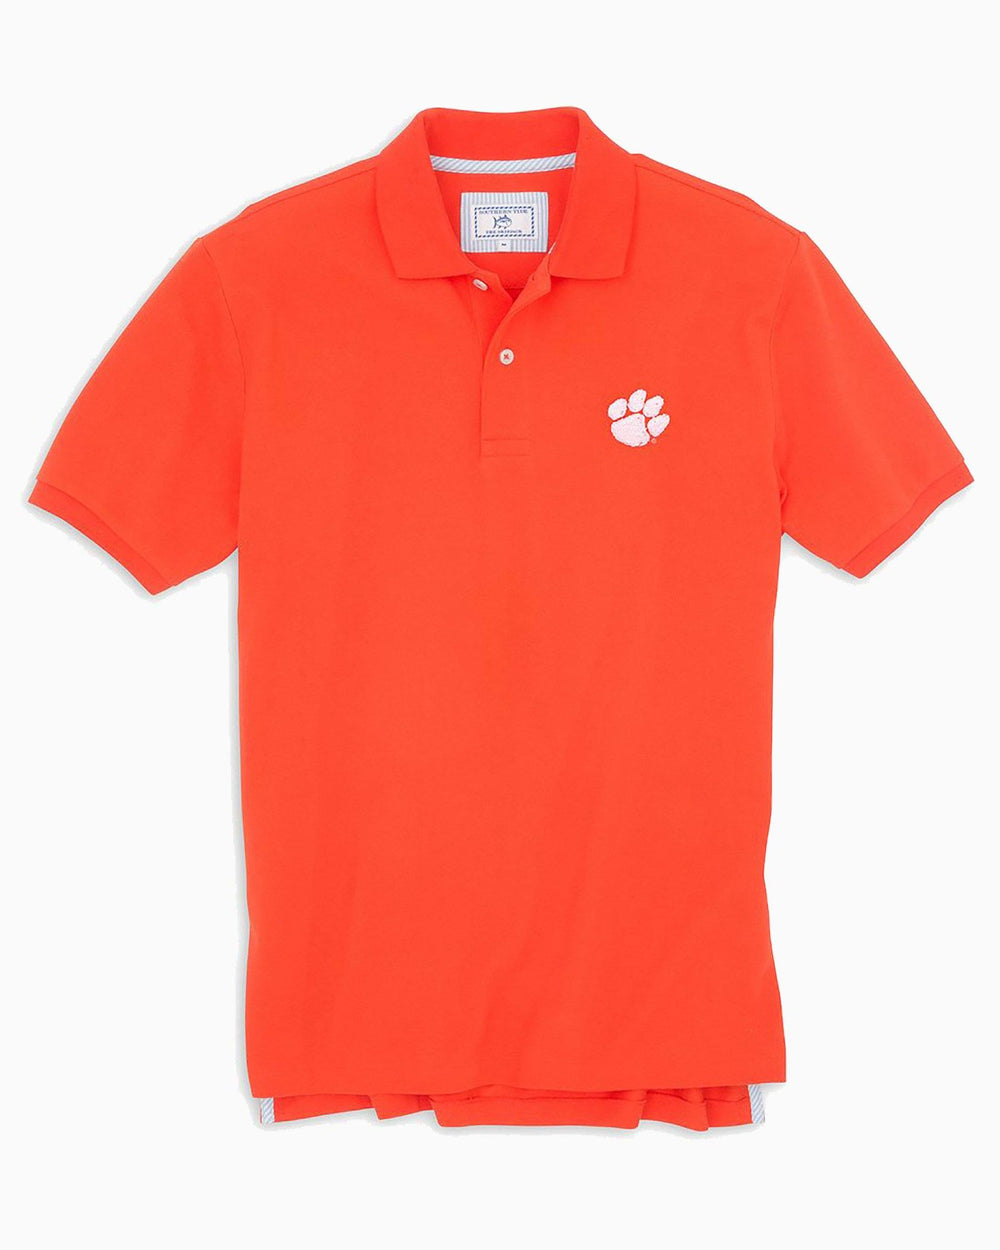 The front view of the Men's Orange Clemson Tigers Pique Polo Shirt by Southern Tide - Endzone Orange